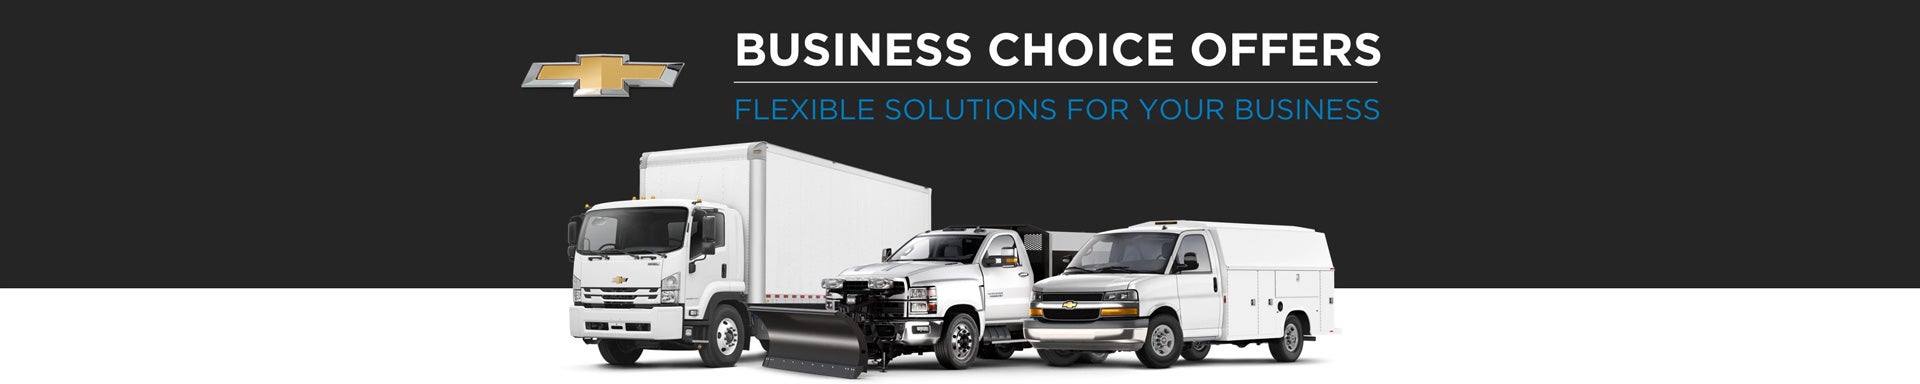 Business Choice Offers